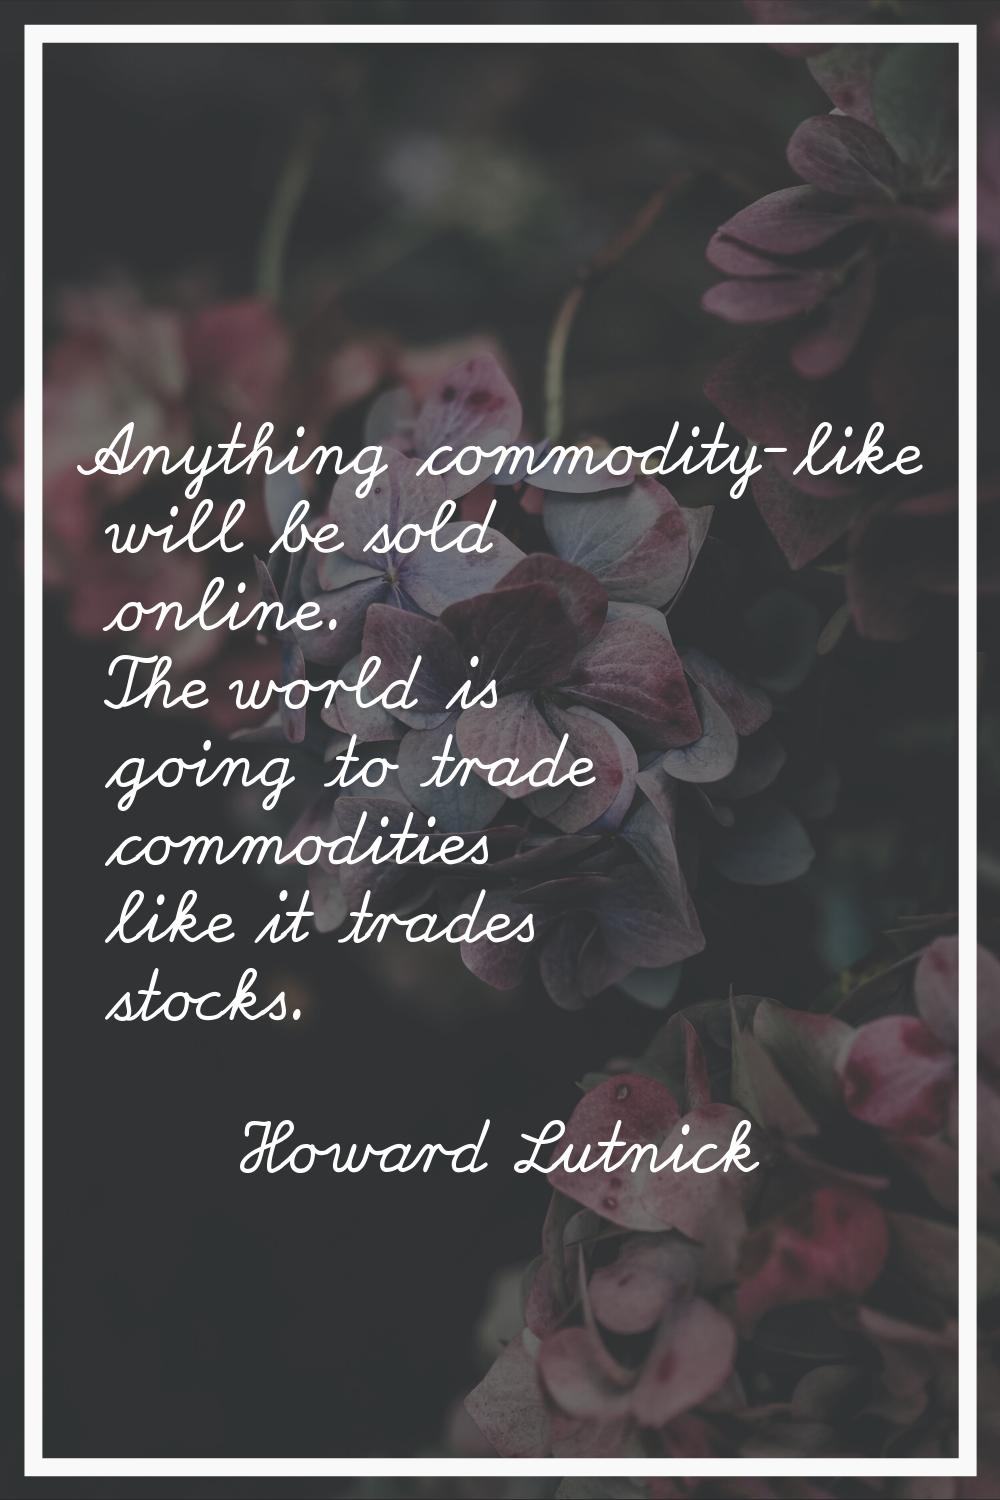 Anything commodity-like will be sold online. The world is going to trade commodities like it trades